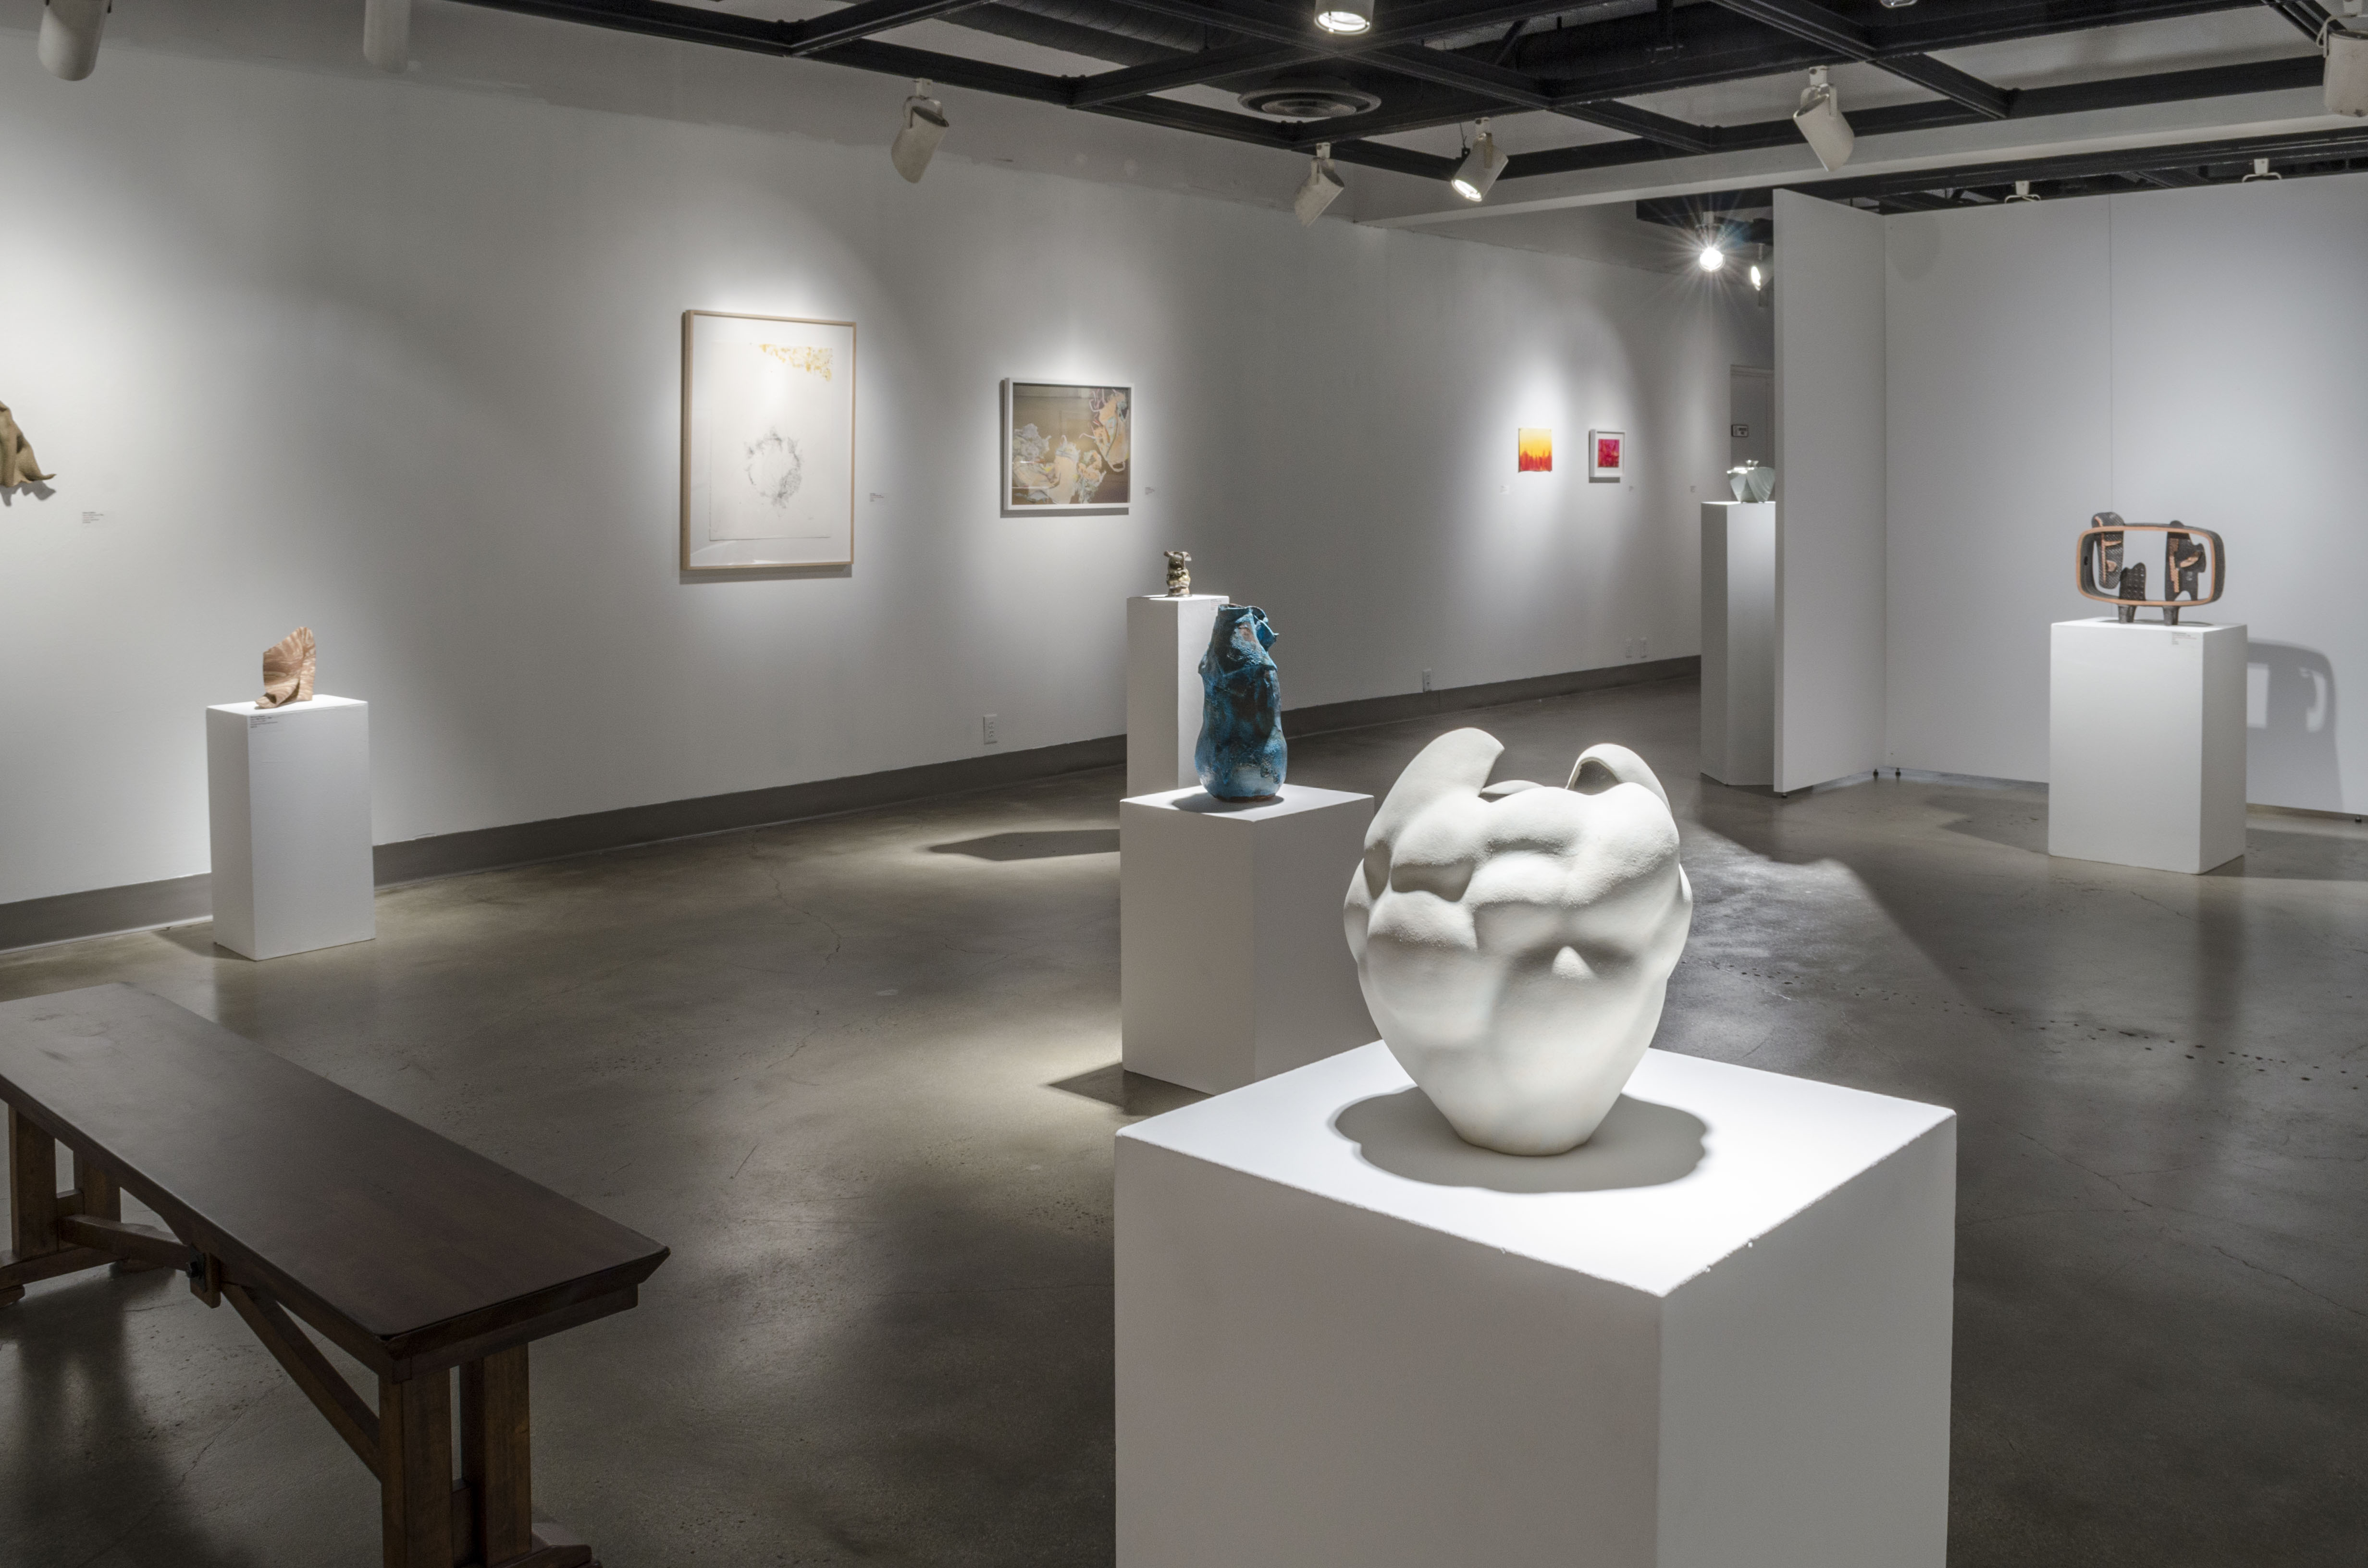 Installation View, Back Gallery, Ink & Clay 40 Exhibition, Sept. 13, 2014 to Oct. 23, 2014.